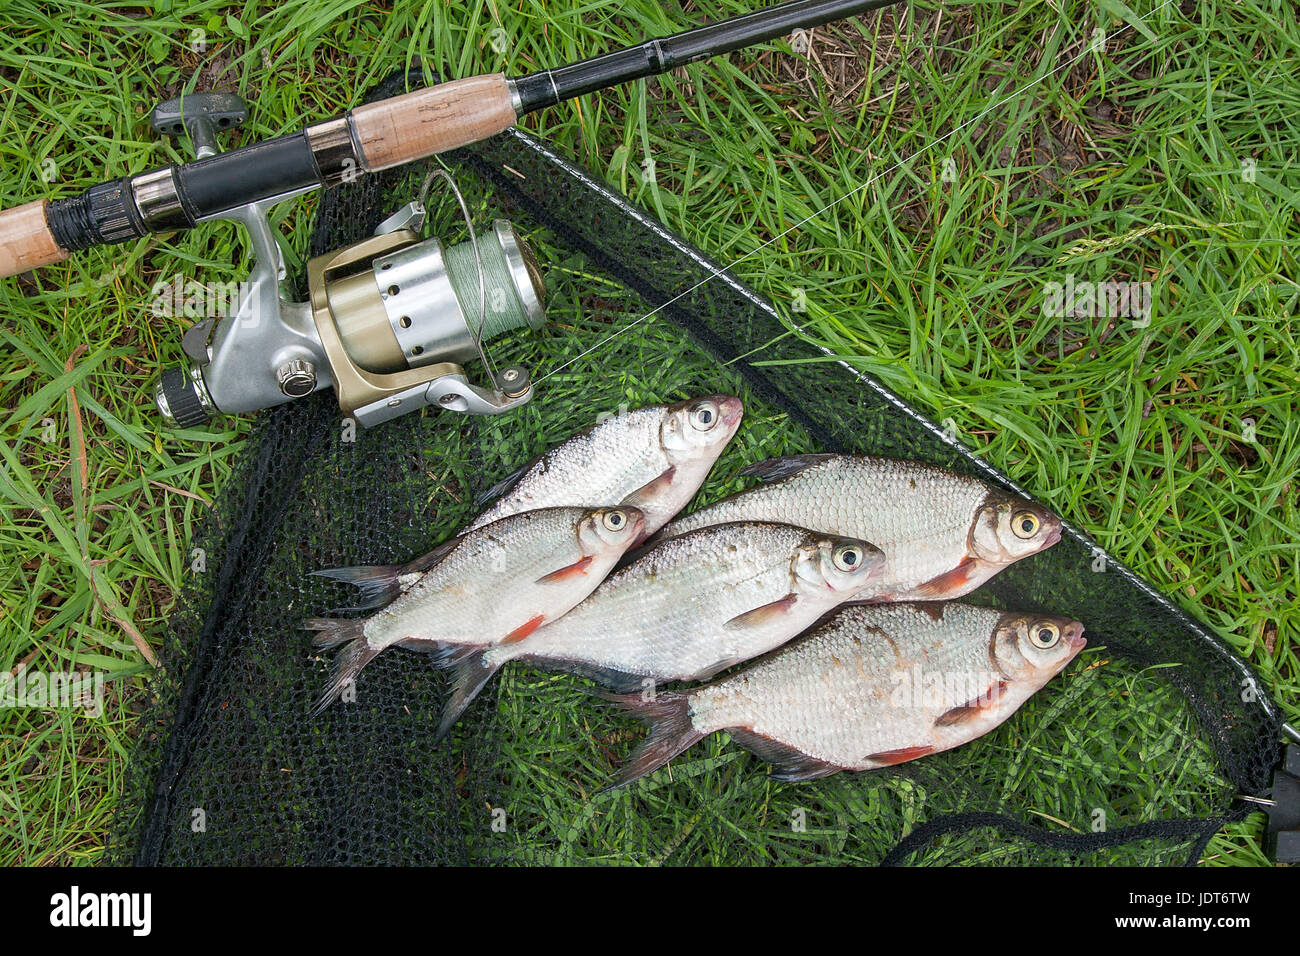 Just taken from the water freshwater fish white bream or silver fish known as blicca bjoerkna and white-eye bream species of the family Cyprinidae on  Stock Photo